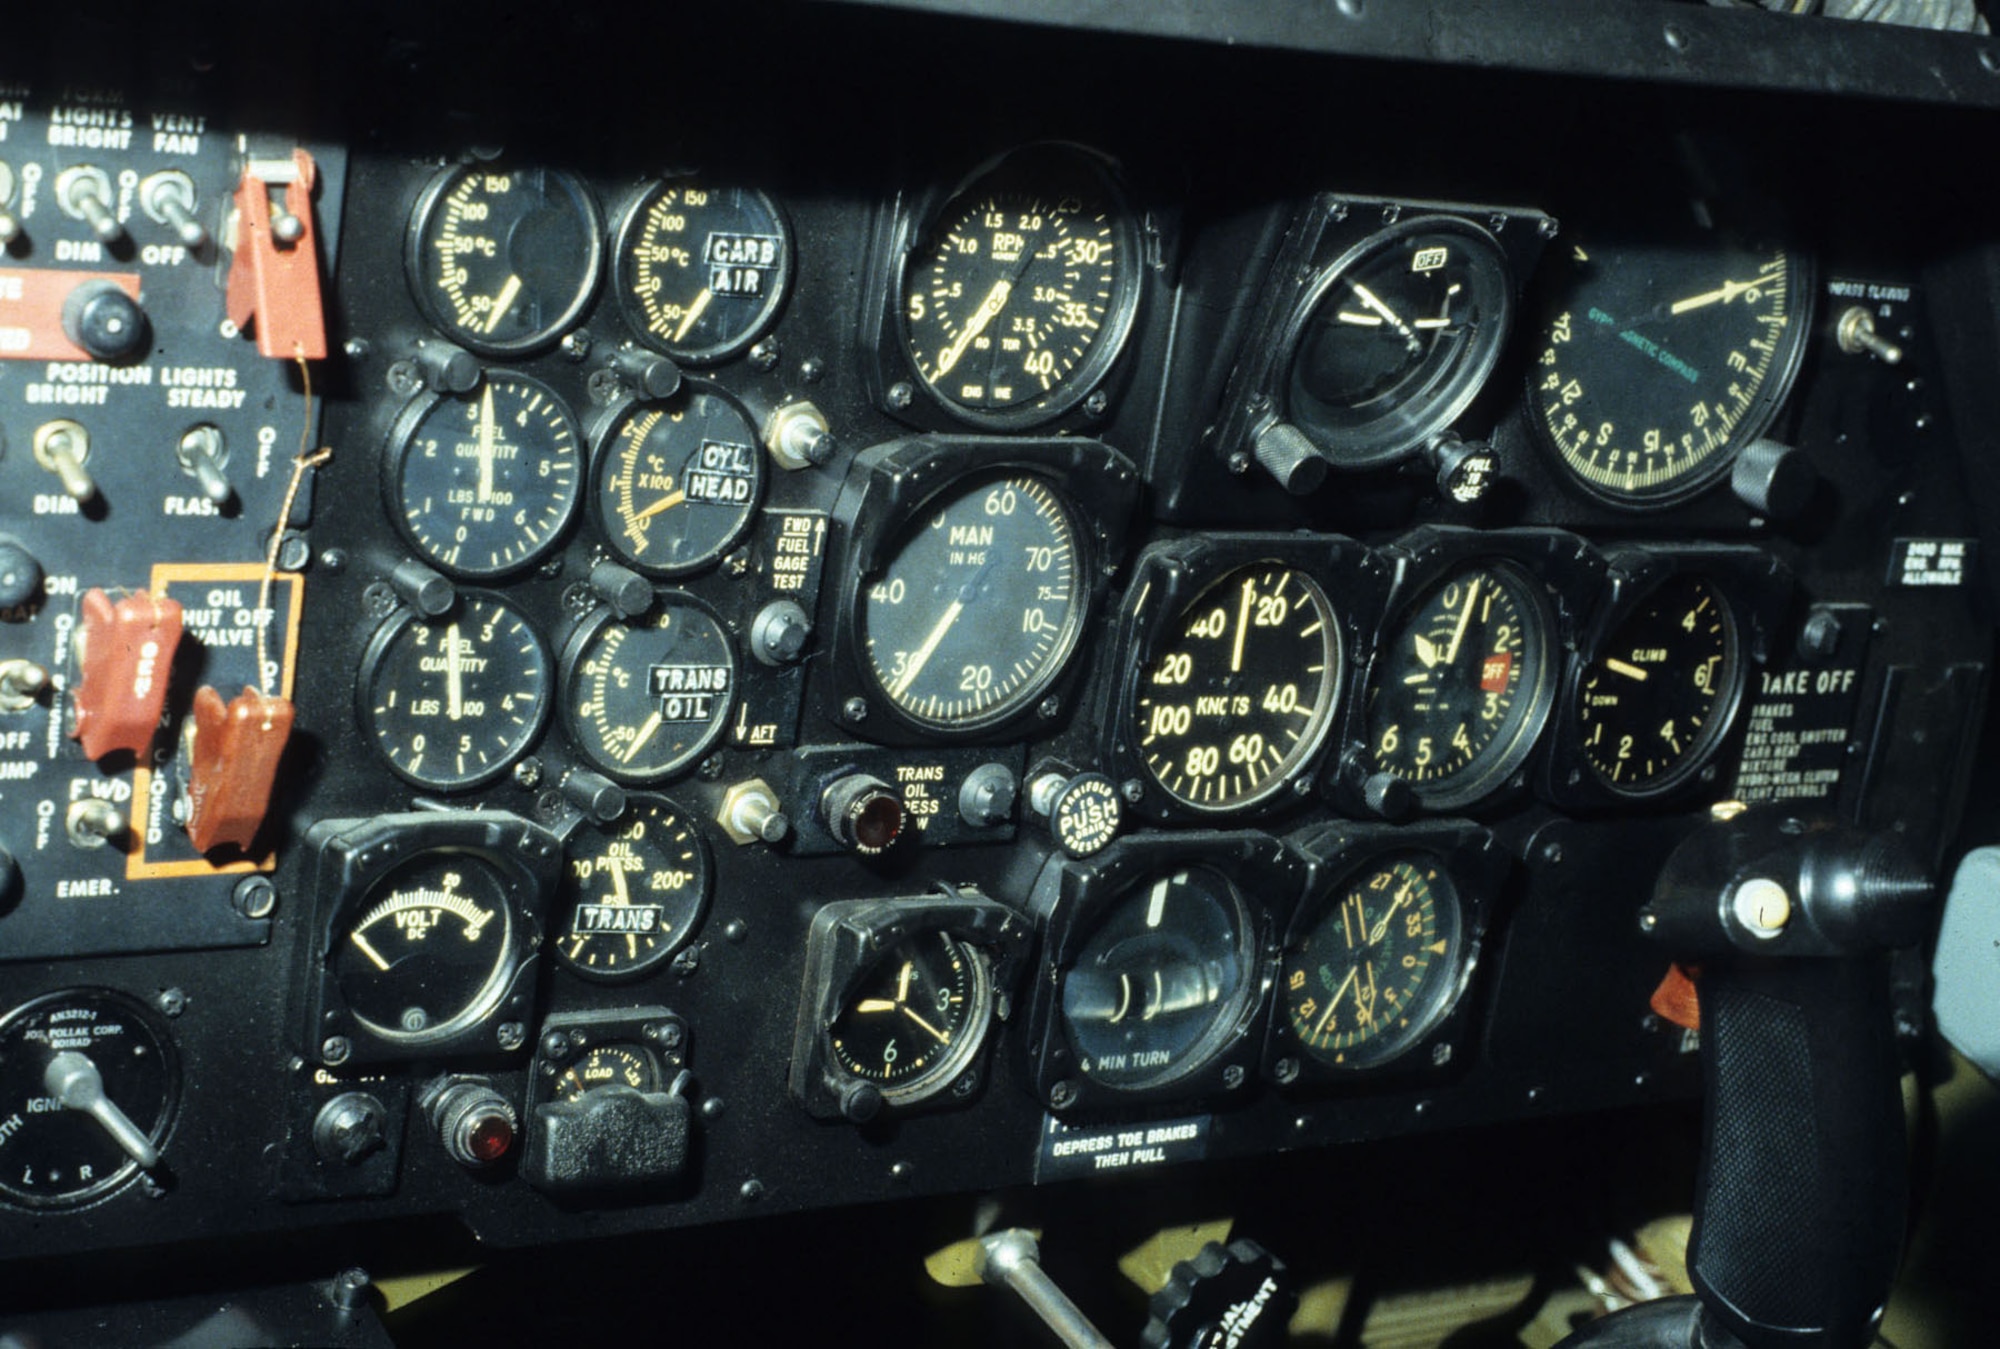 DAYTON, Ohio - Sikorsky UH-19B cockpit at the National Museum of the U.S. Air Force. (U.S. Air Force photo)